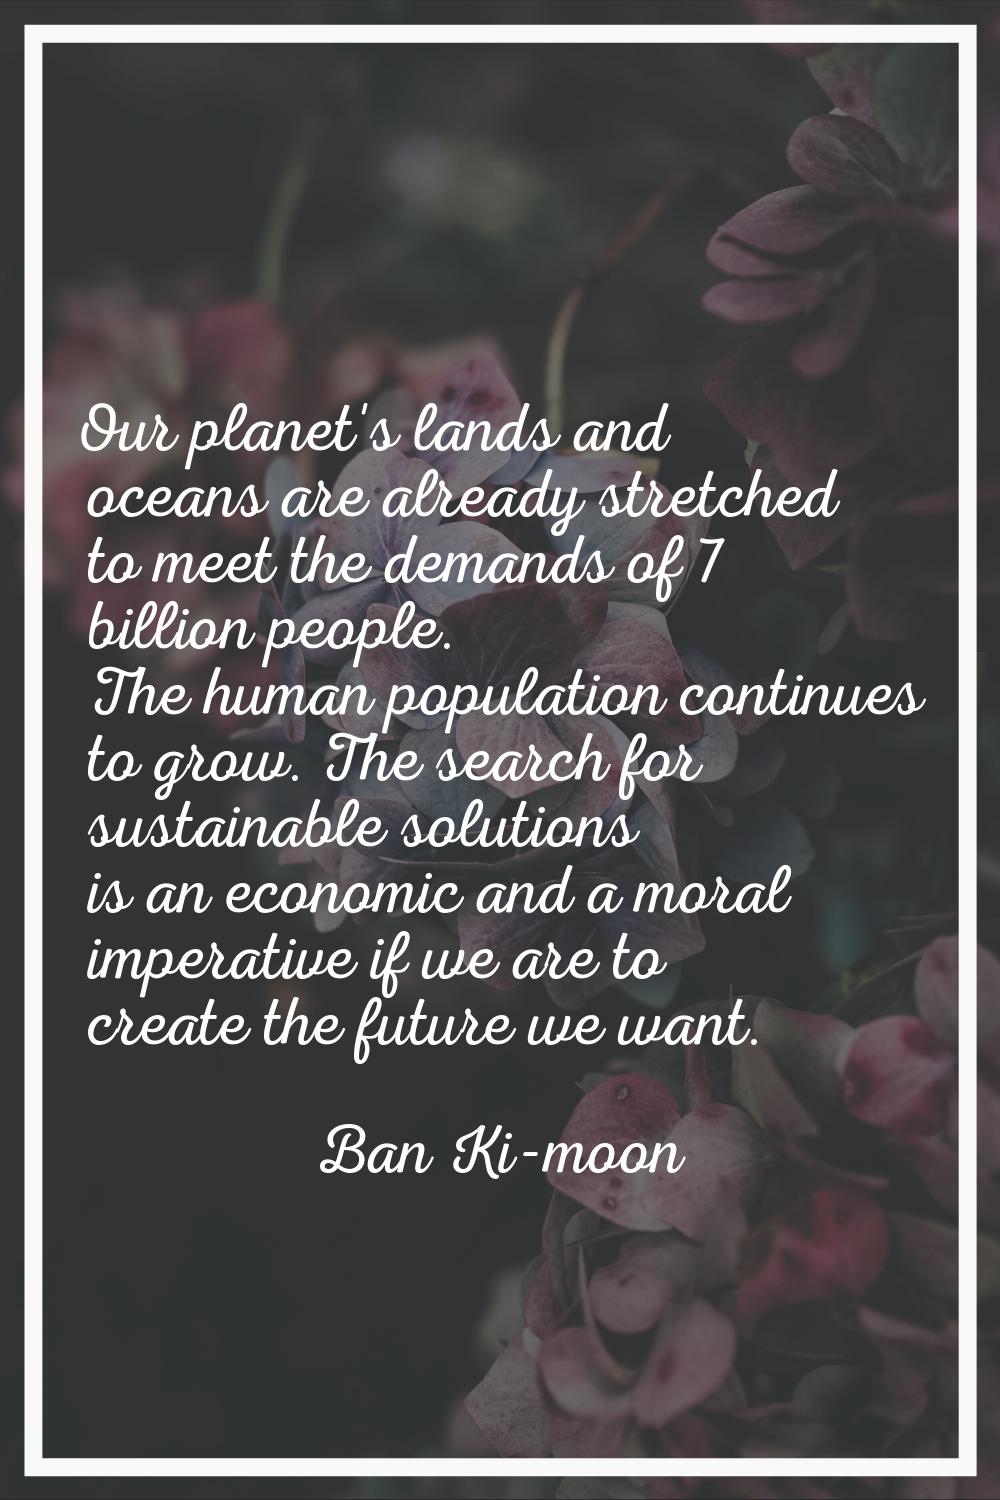 Our planet's lands and oceans are already stretched to meet the demands of 7 billion people. The hu